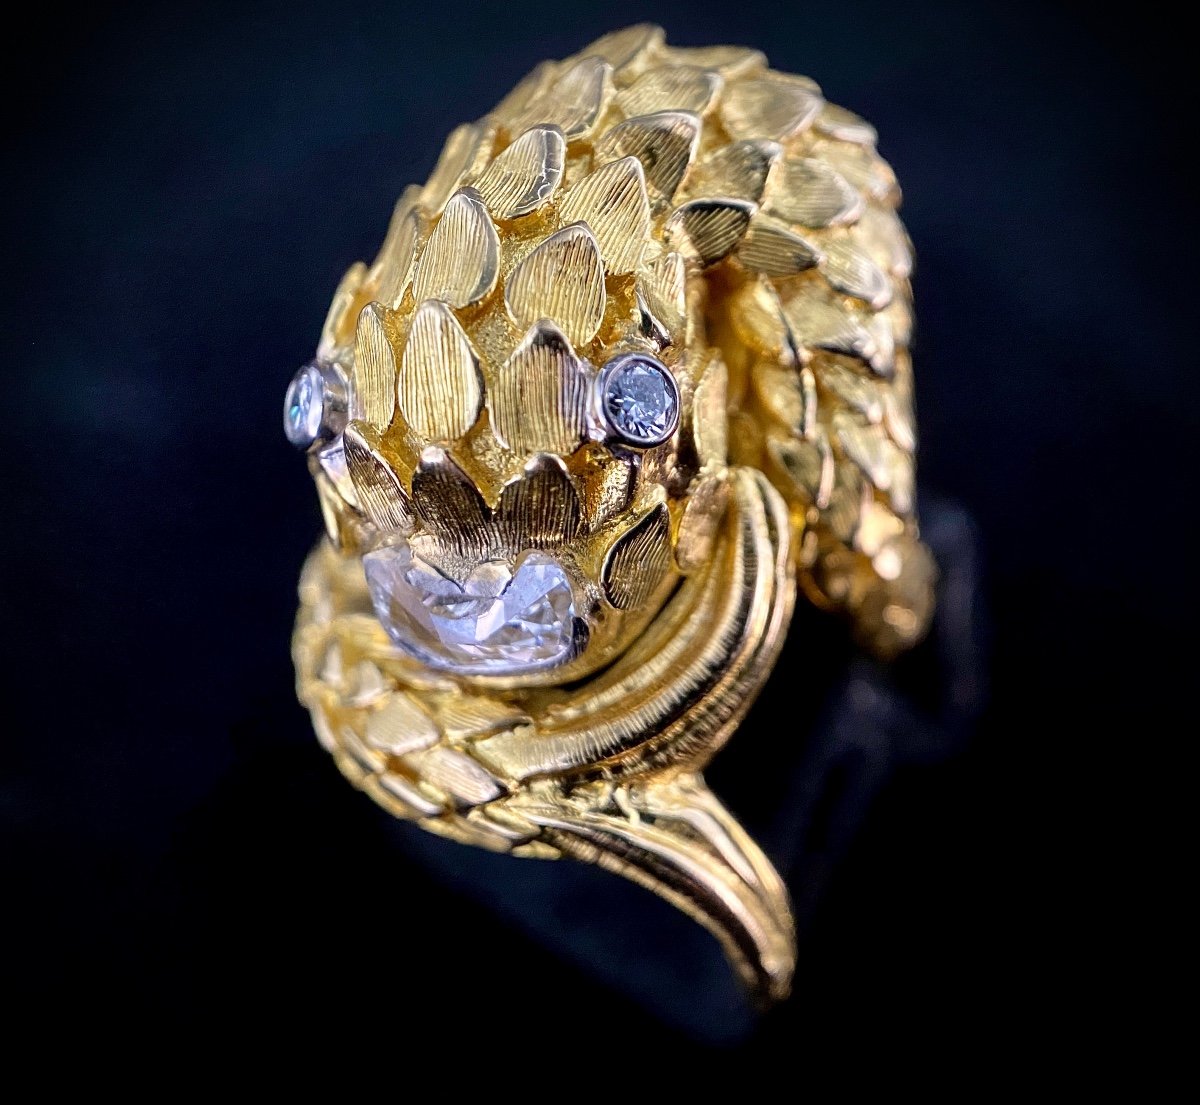 Chiseled Yellow Gold Ring In The Shape Of A Crocodile With Diamond Of 0.35 Carat + 0.10 Carat-photo-1